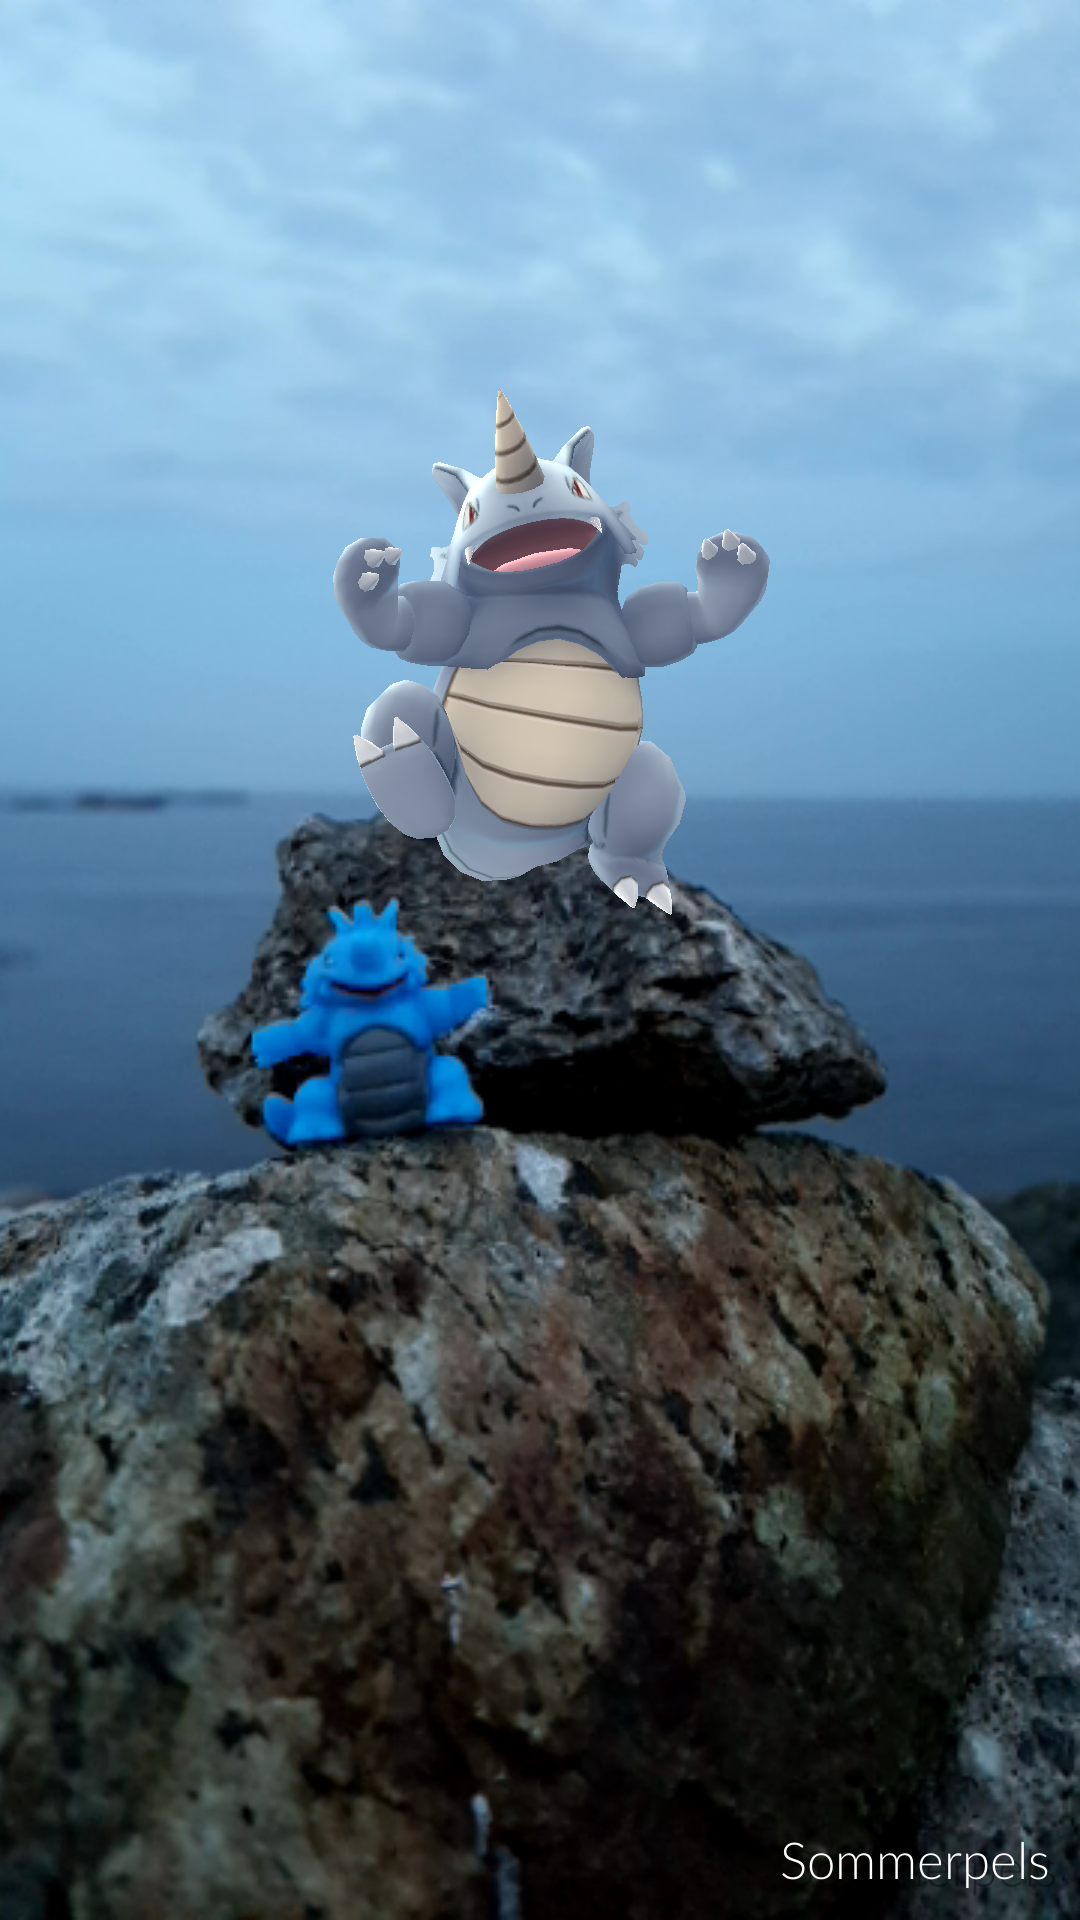 Went To A Rocky Place By The Shore Girlfriend Found Rhydon In